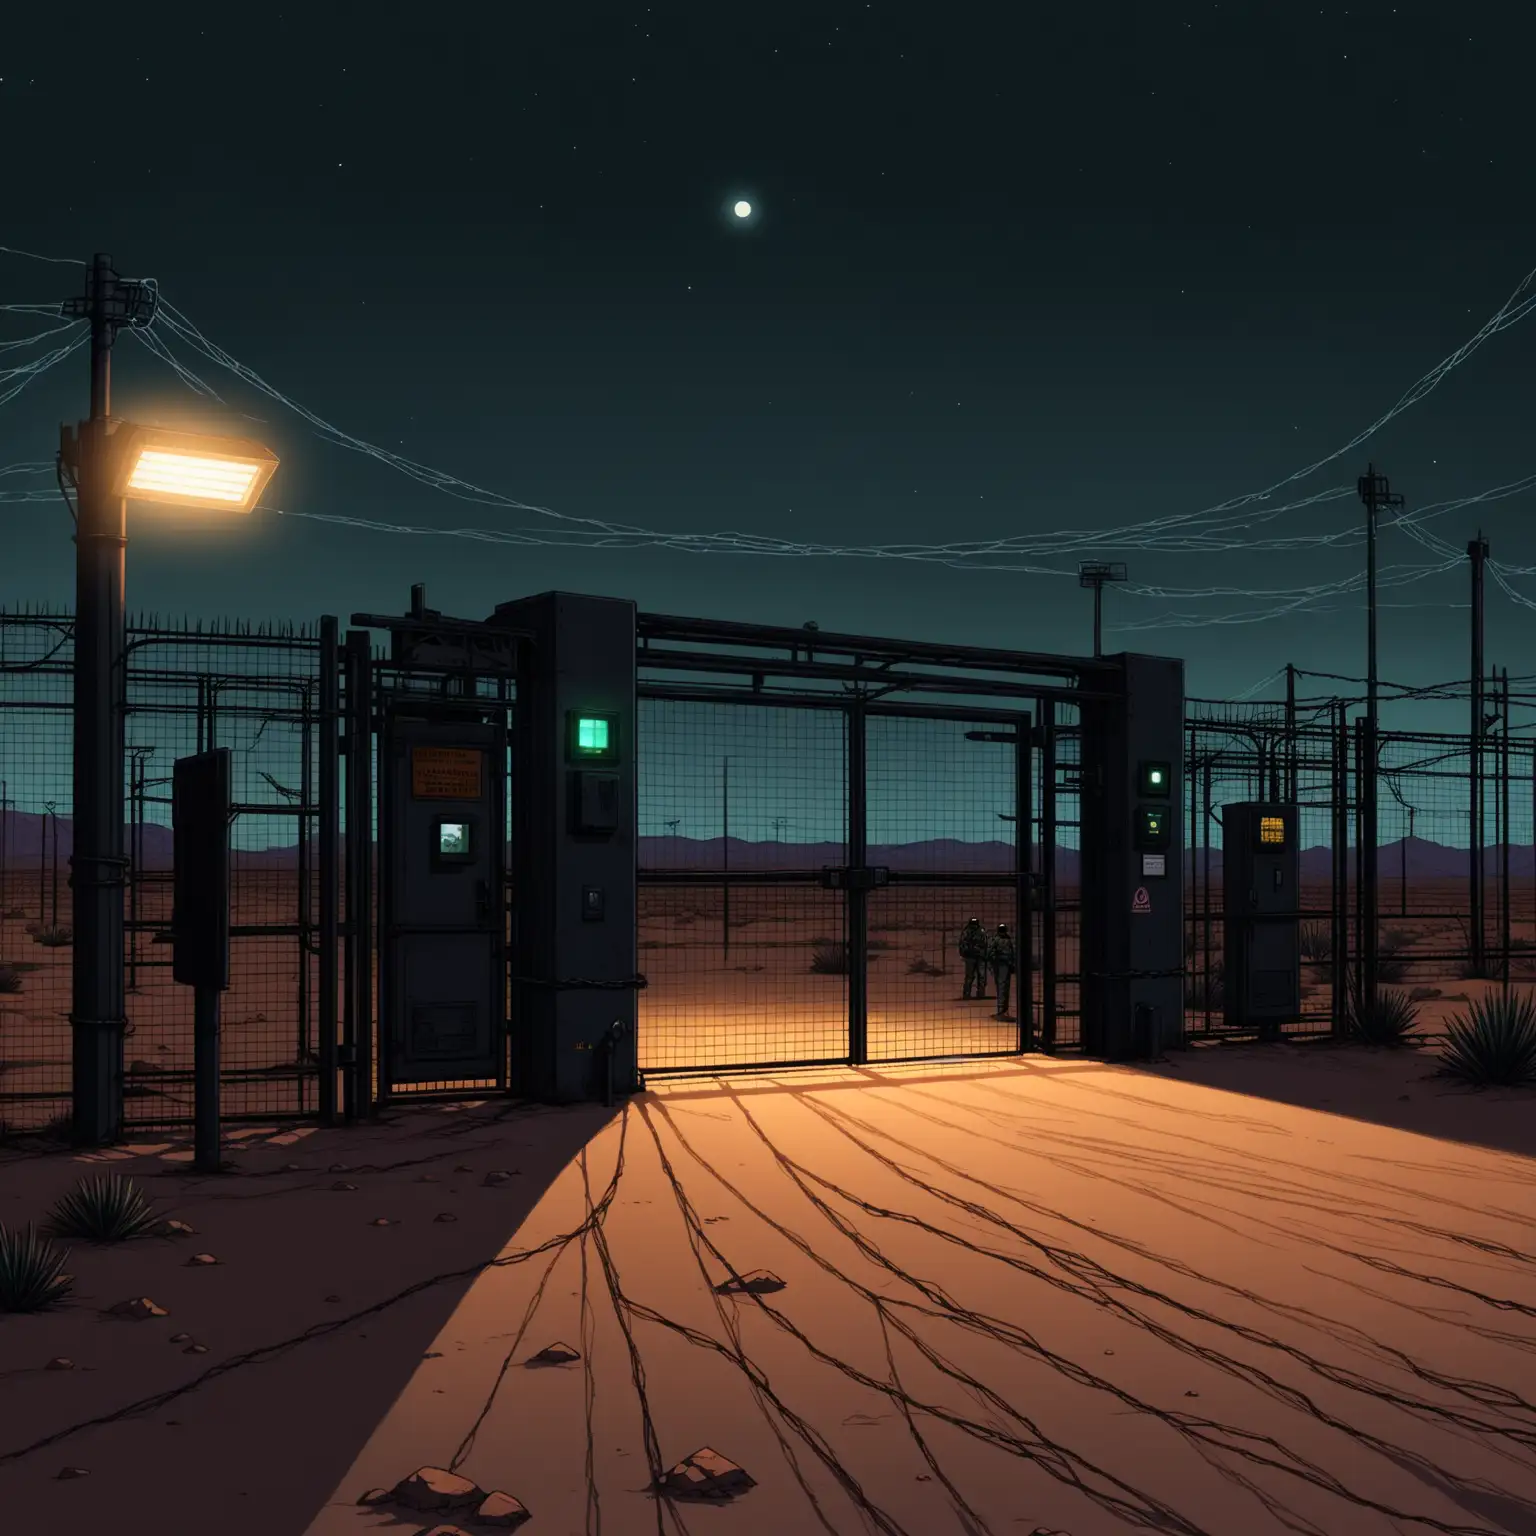 Point and click horror game at night, The entrance gate to Area 51 is a formidable barrier, guarded by high fences topped with razor wire and surveillance cameras scanning the perimeter. Two massive steel gates stand sentinel, flanked by guard towers equipped with spotlights and armed security personnel. Floodlights illuminate the area, casting harsh shadows across the desert landscape. Signs warning of lethal force and restricted access serve as a chilling reminder of the facility's secrecy. As the player approaches, they must devise a plan to bypass security and gain entry to the mysterious compound, setting the tone for the perilous journey that lies ahead.